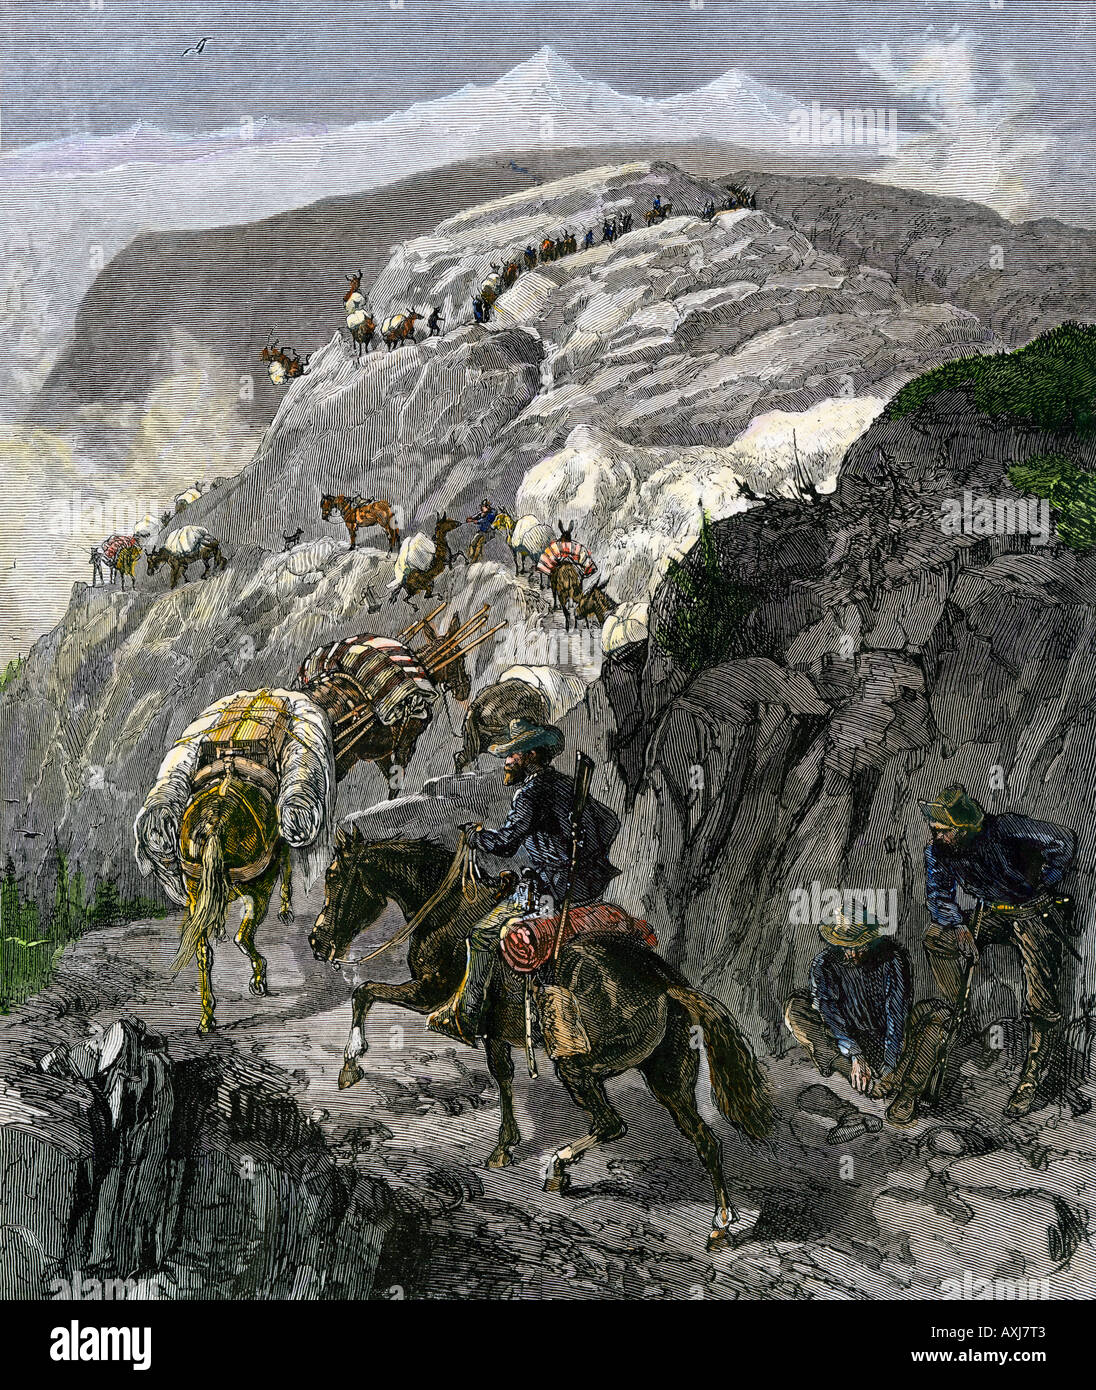 General Oliver Otis Howard pursuing the Nez Perce Indians on the Dead Mule Trail in Idaho 1877. Hand-colored woodcut Stock Photo